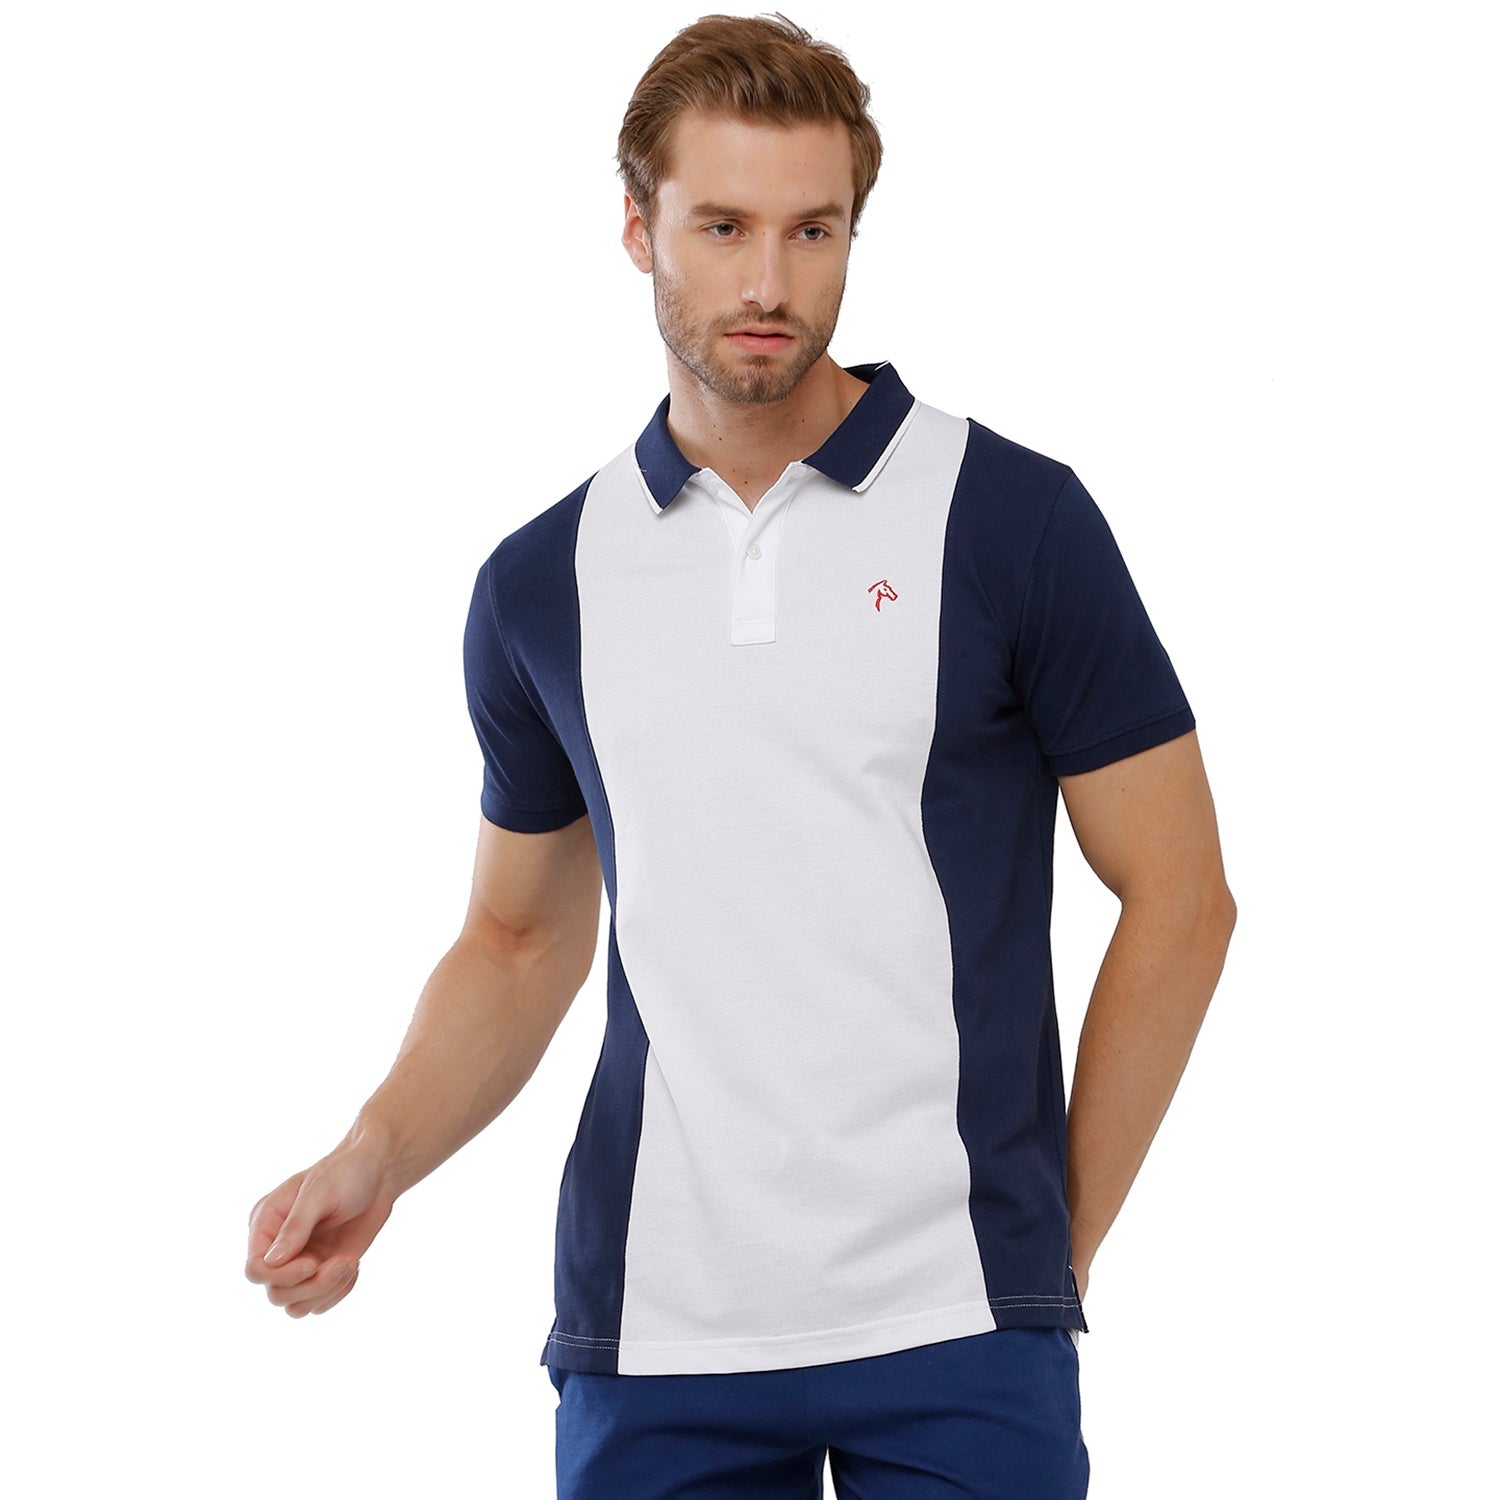 Classic Polo Bro Mens Color Block Slim Fit Polo Neck White & Navy T-Shirt -Brp 330 A T-shirt Classic Polo 